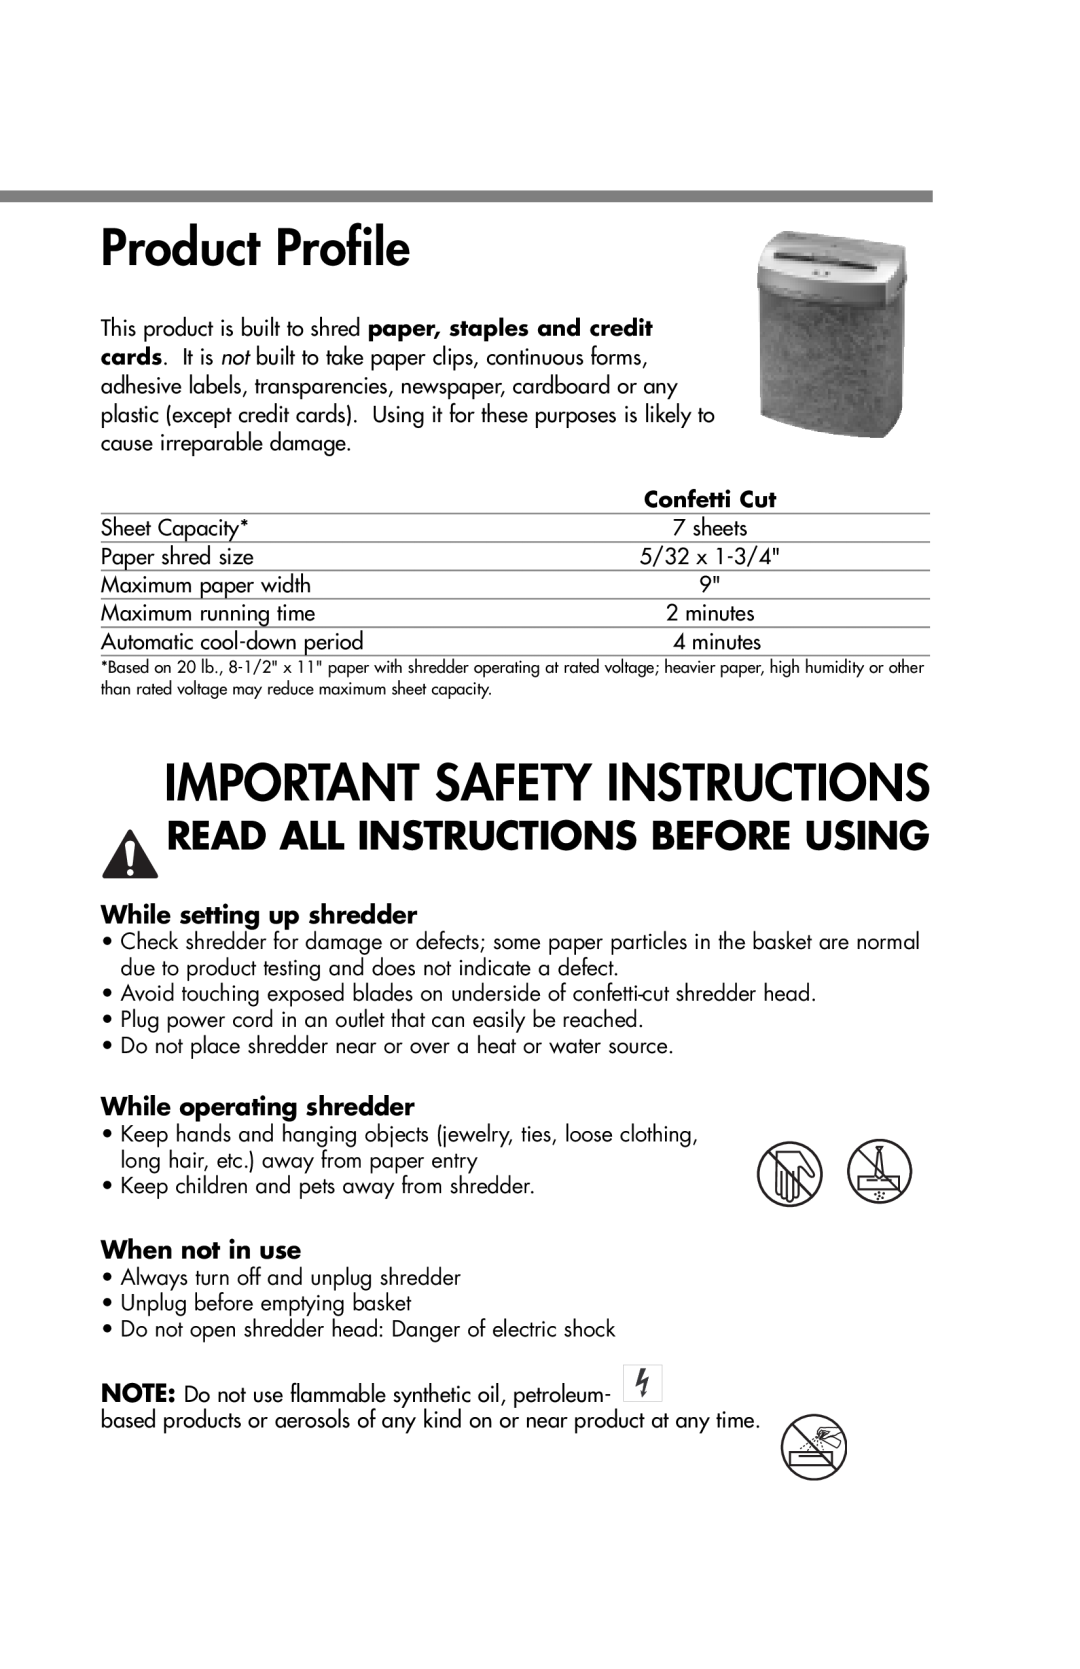 Fellowes T7CM manual Product Profile, Important Safety Instructions, While setting up shredder, While operating shredder 